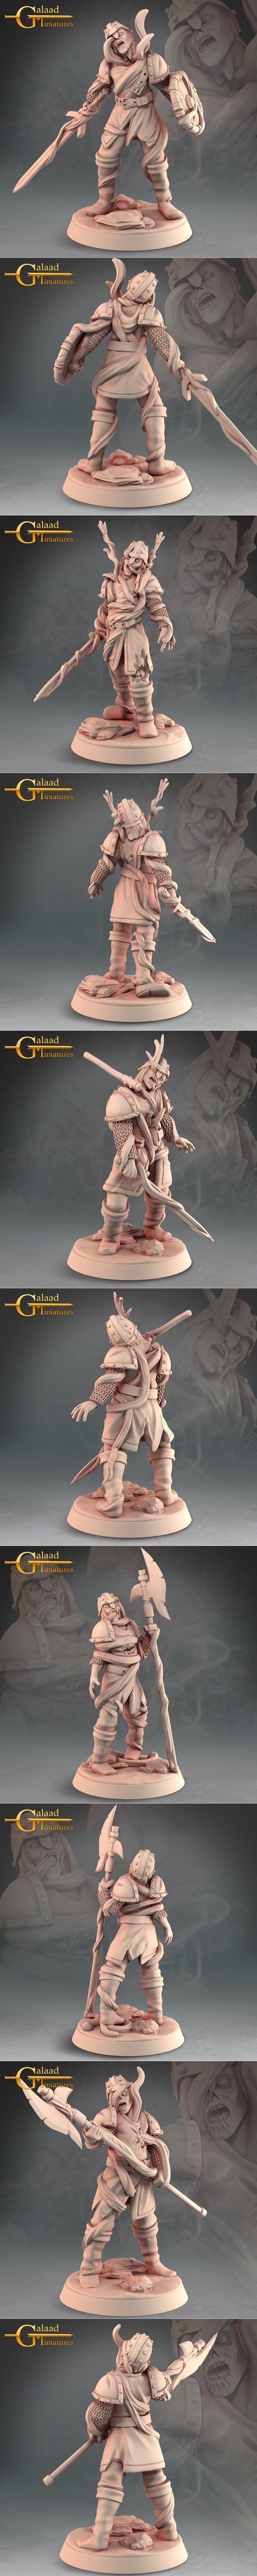 Into The Woods - Zombies – 3D Printable STL